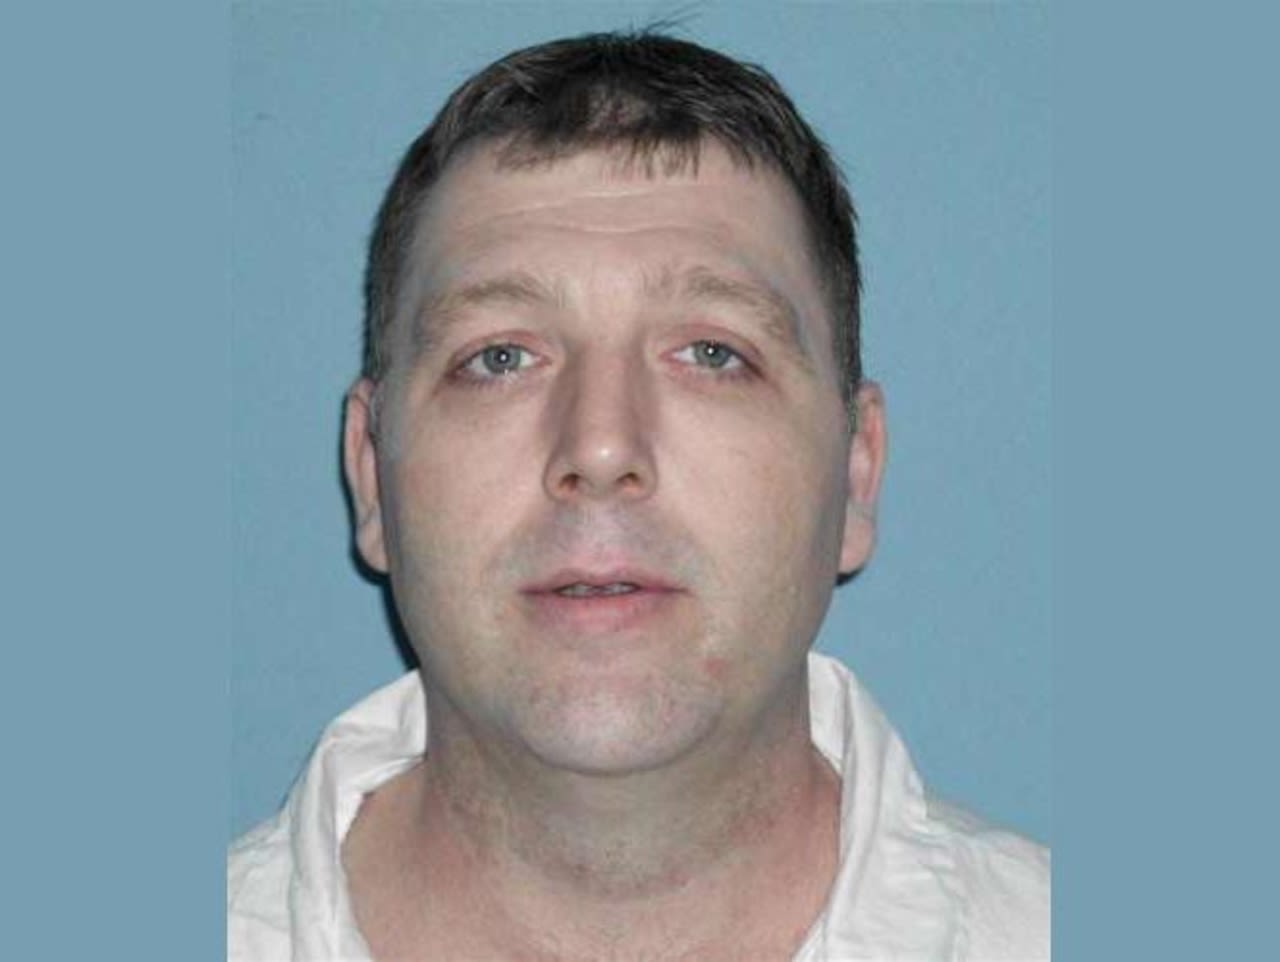 Alabama executes Jamie Mills for elderly couple’s 2004 beating deaths